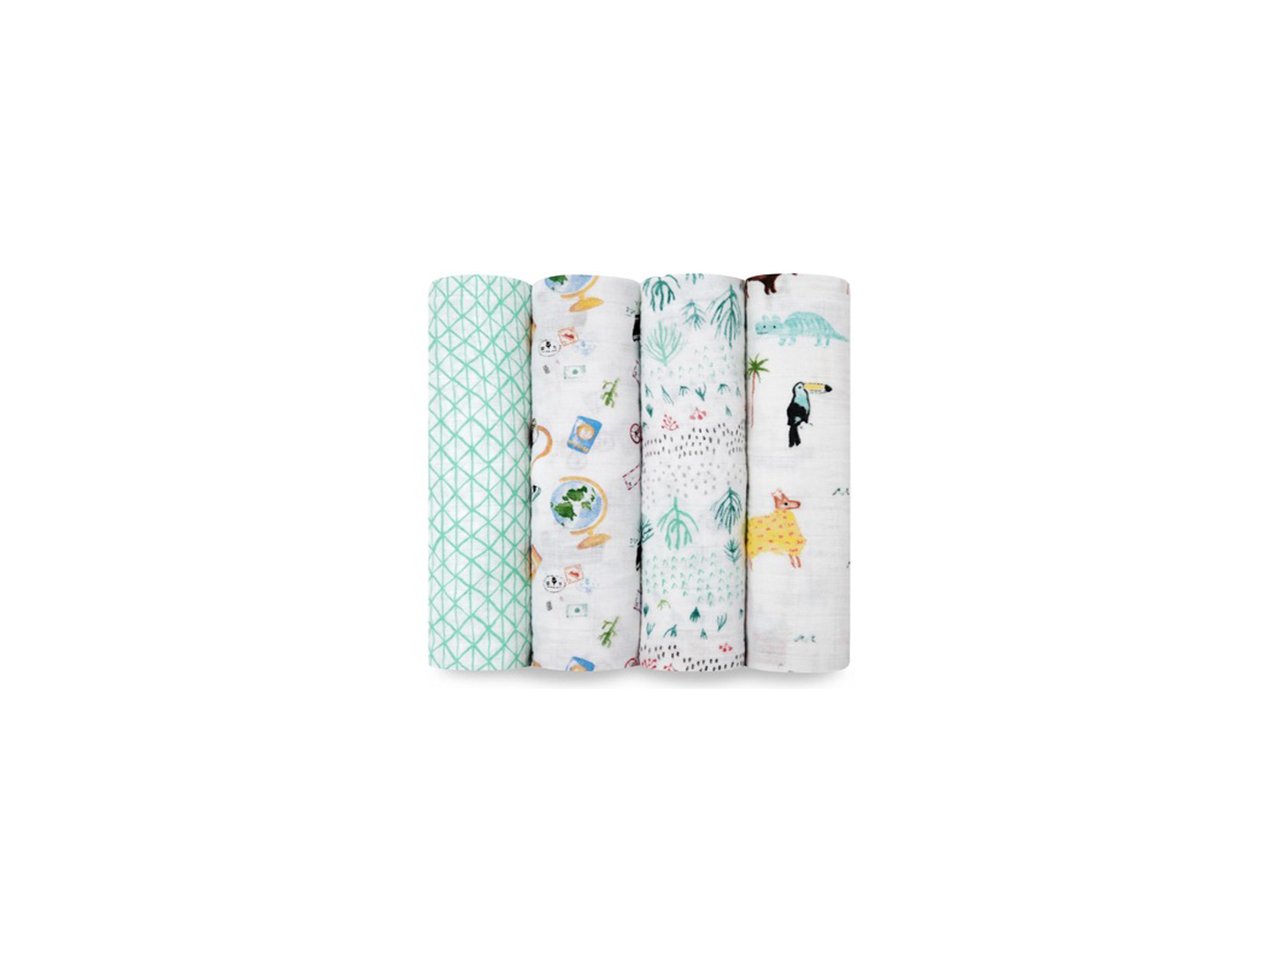 aden + anais classic swaddles around the world 4 pack